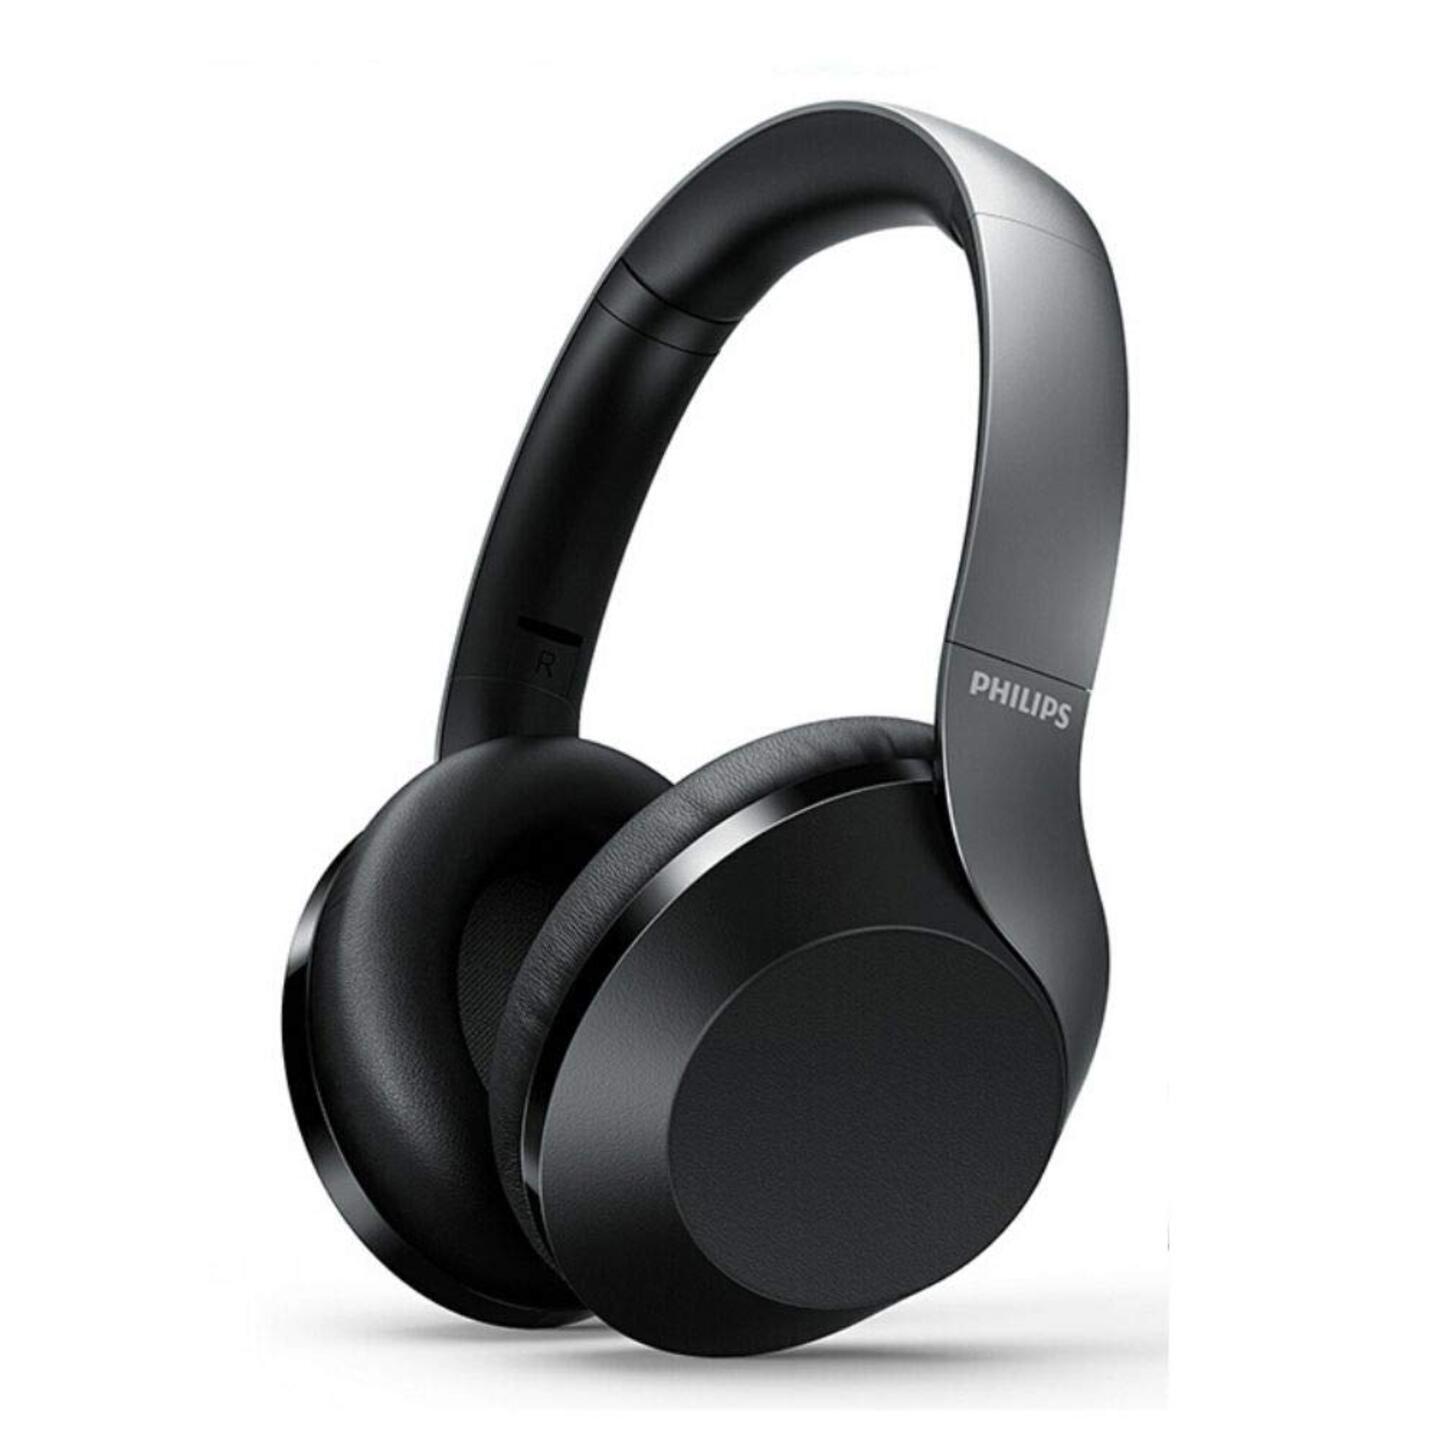 Philips TAPH802 Bluetooth Headphone with Built-in Microphone, 30H Playtime, Hi-Res Audio, Noise Isolation & Rapid Charge